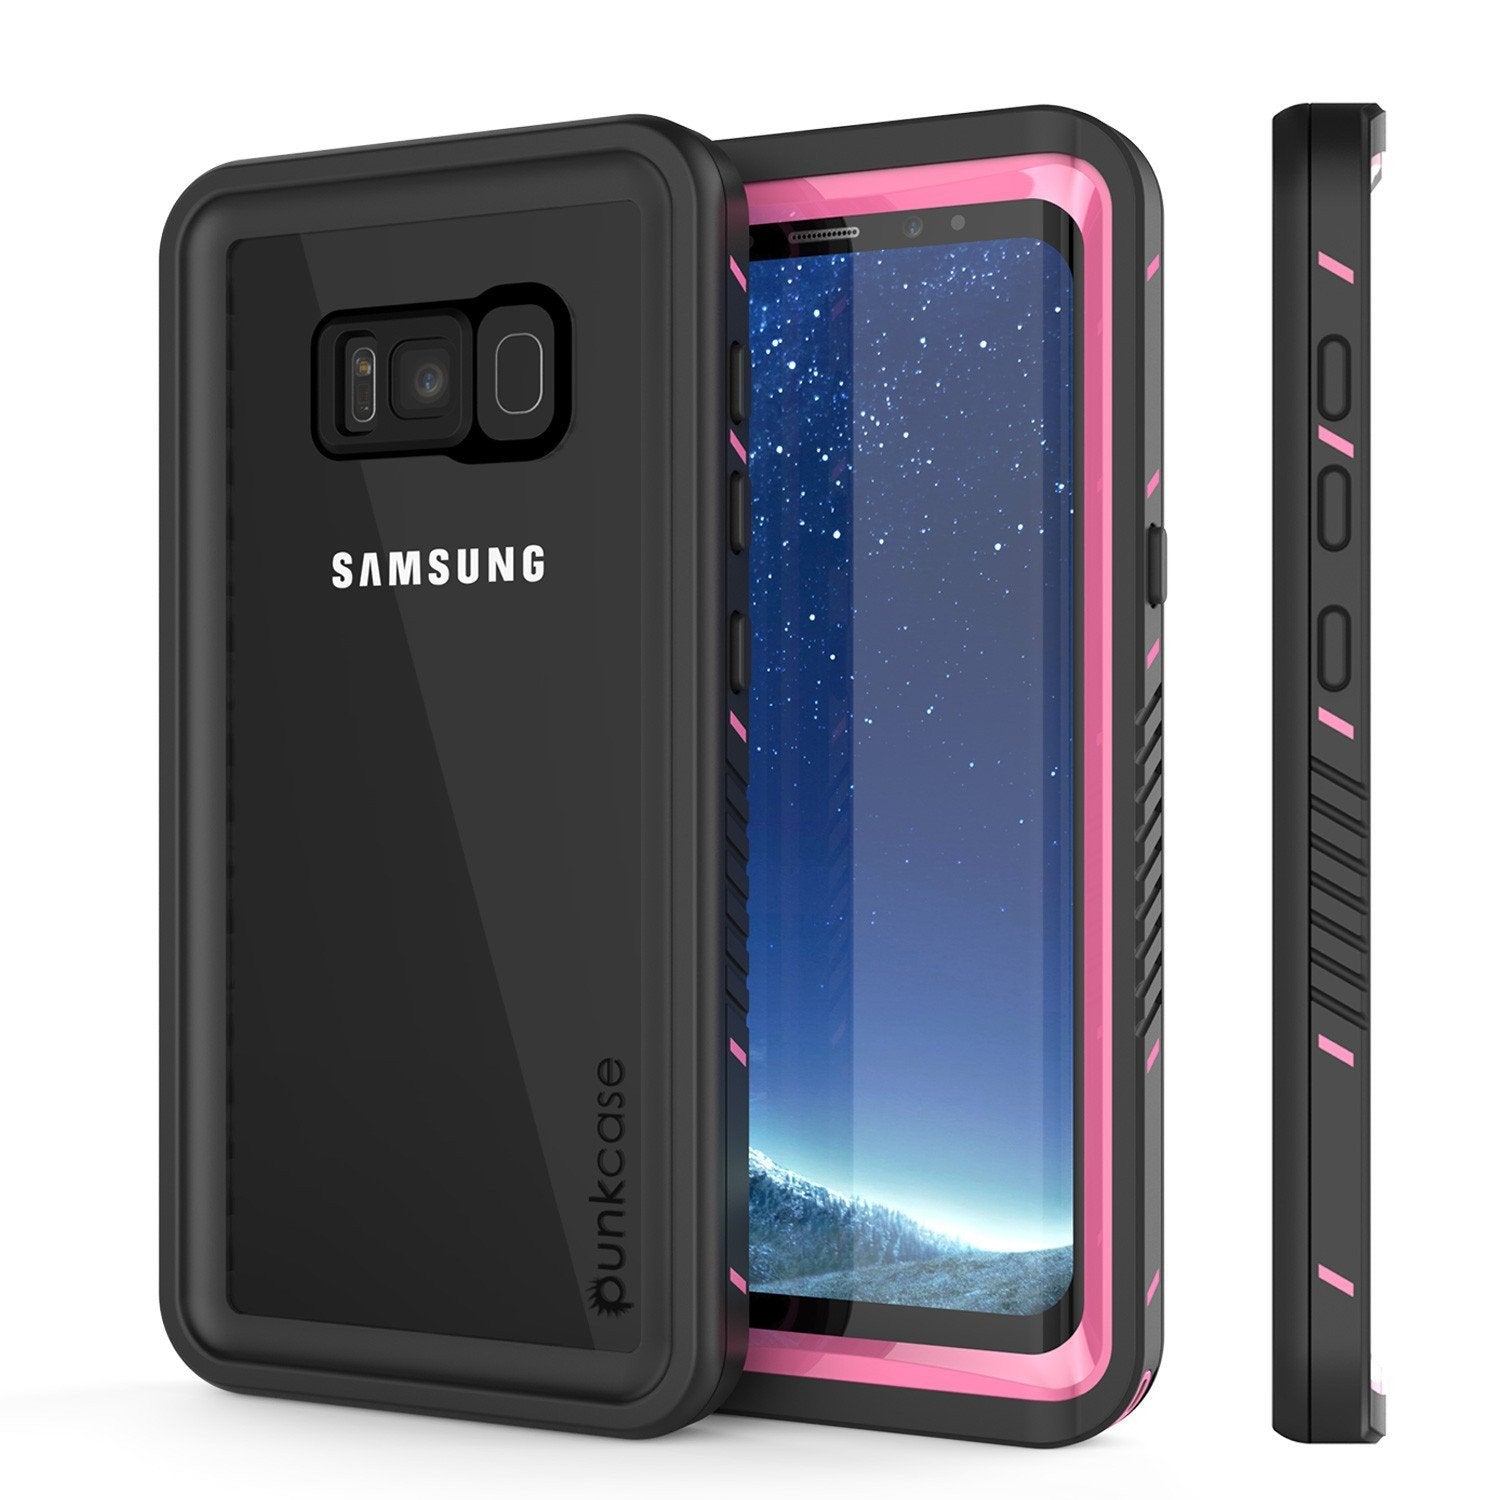 Galaxy S8 Waterproof Case, Punkcase [Extreme Series] [Slim Fit] [IP68 Certified] [Shockproof] [Snowproof] [Dirproof] Armor Cover W/ Built In Screen Protector for Samsung Galaxy S8 [Pink]